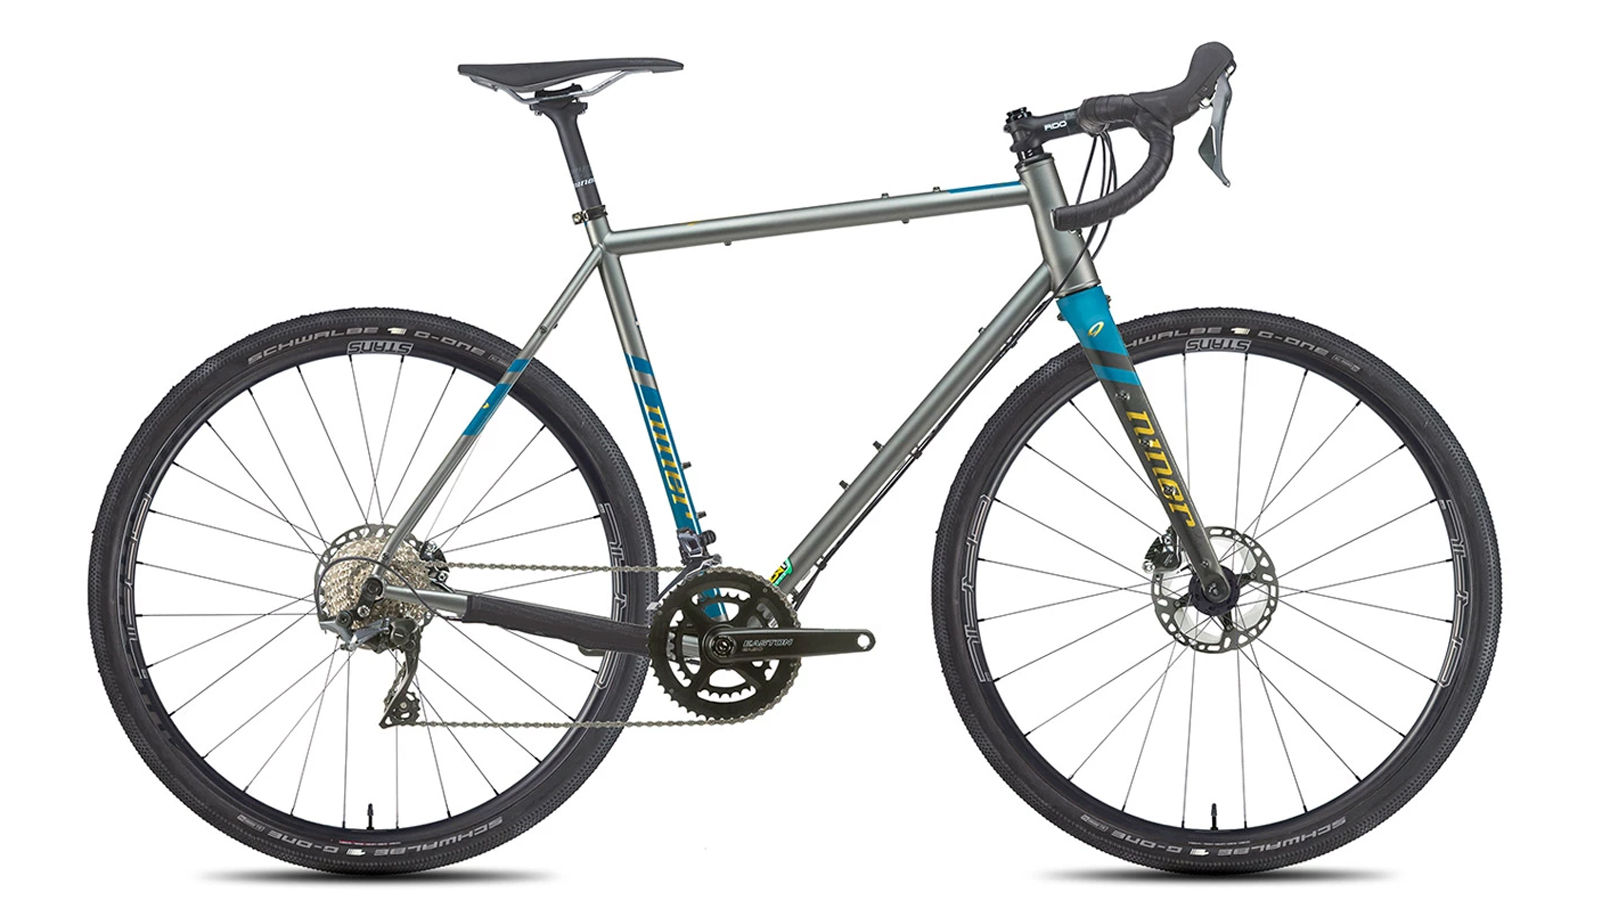 Best steel road bikes They say 'steel is real', and here's a roundup